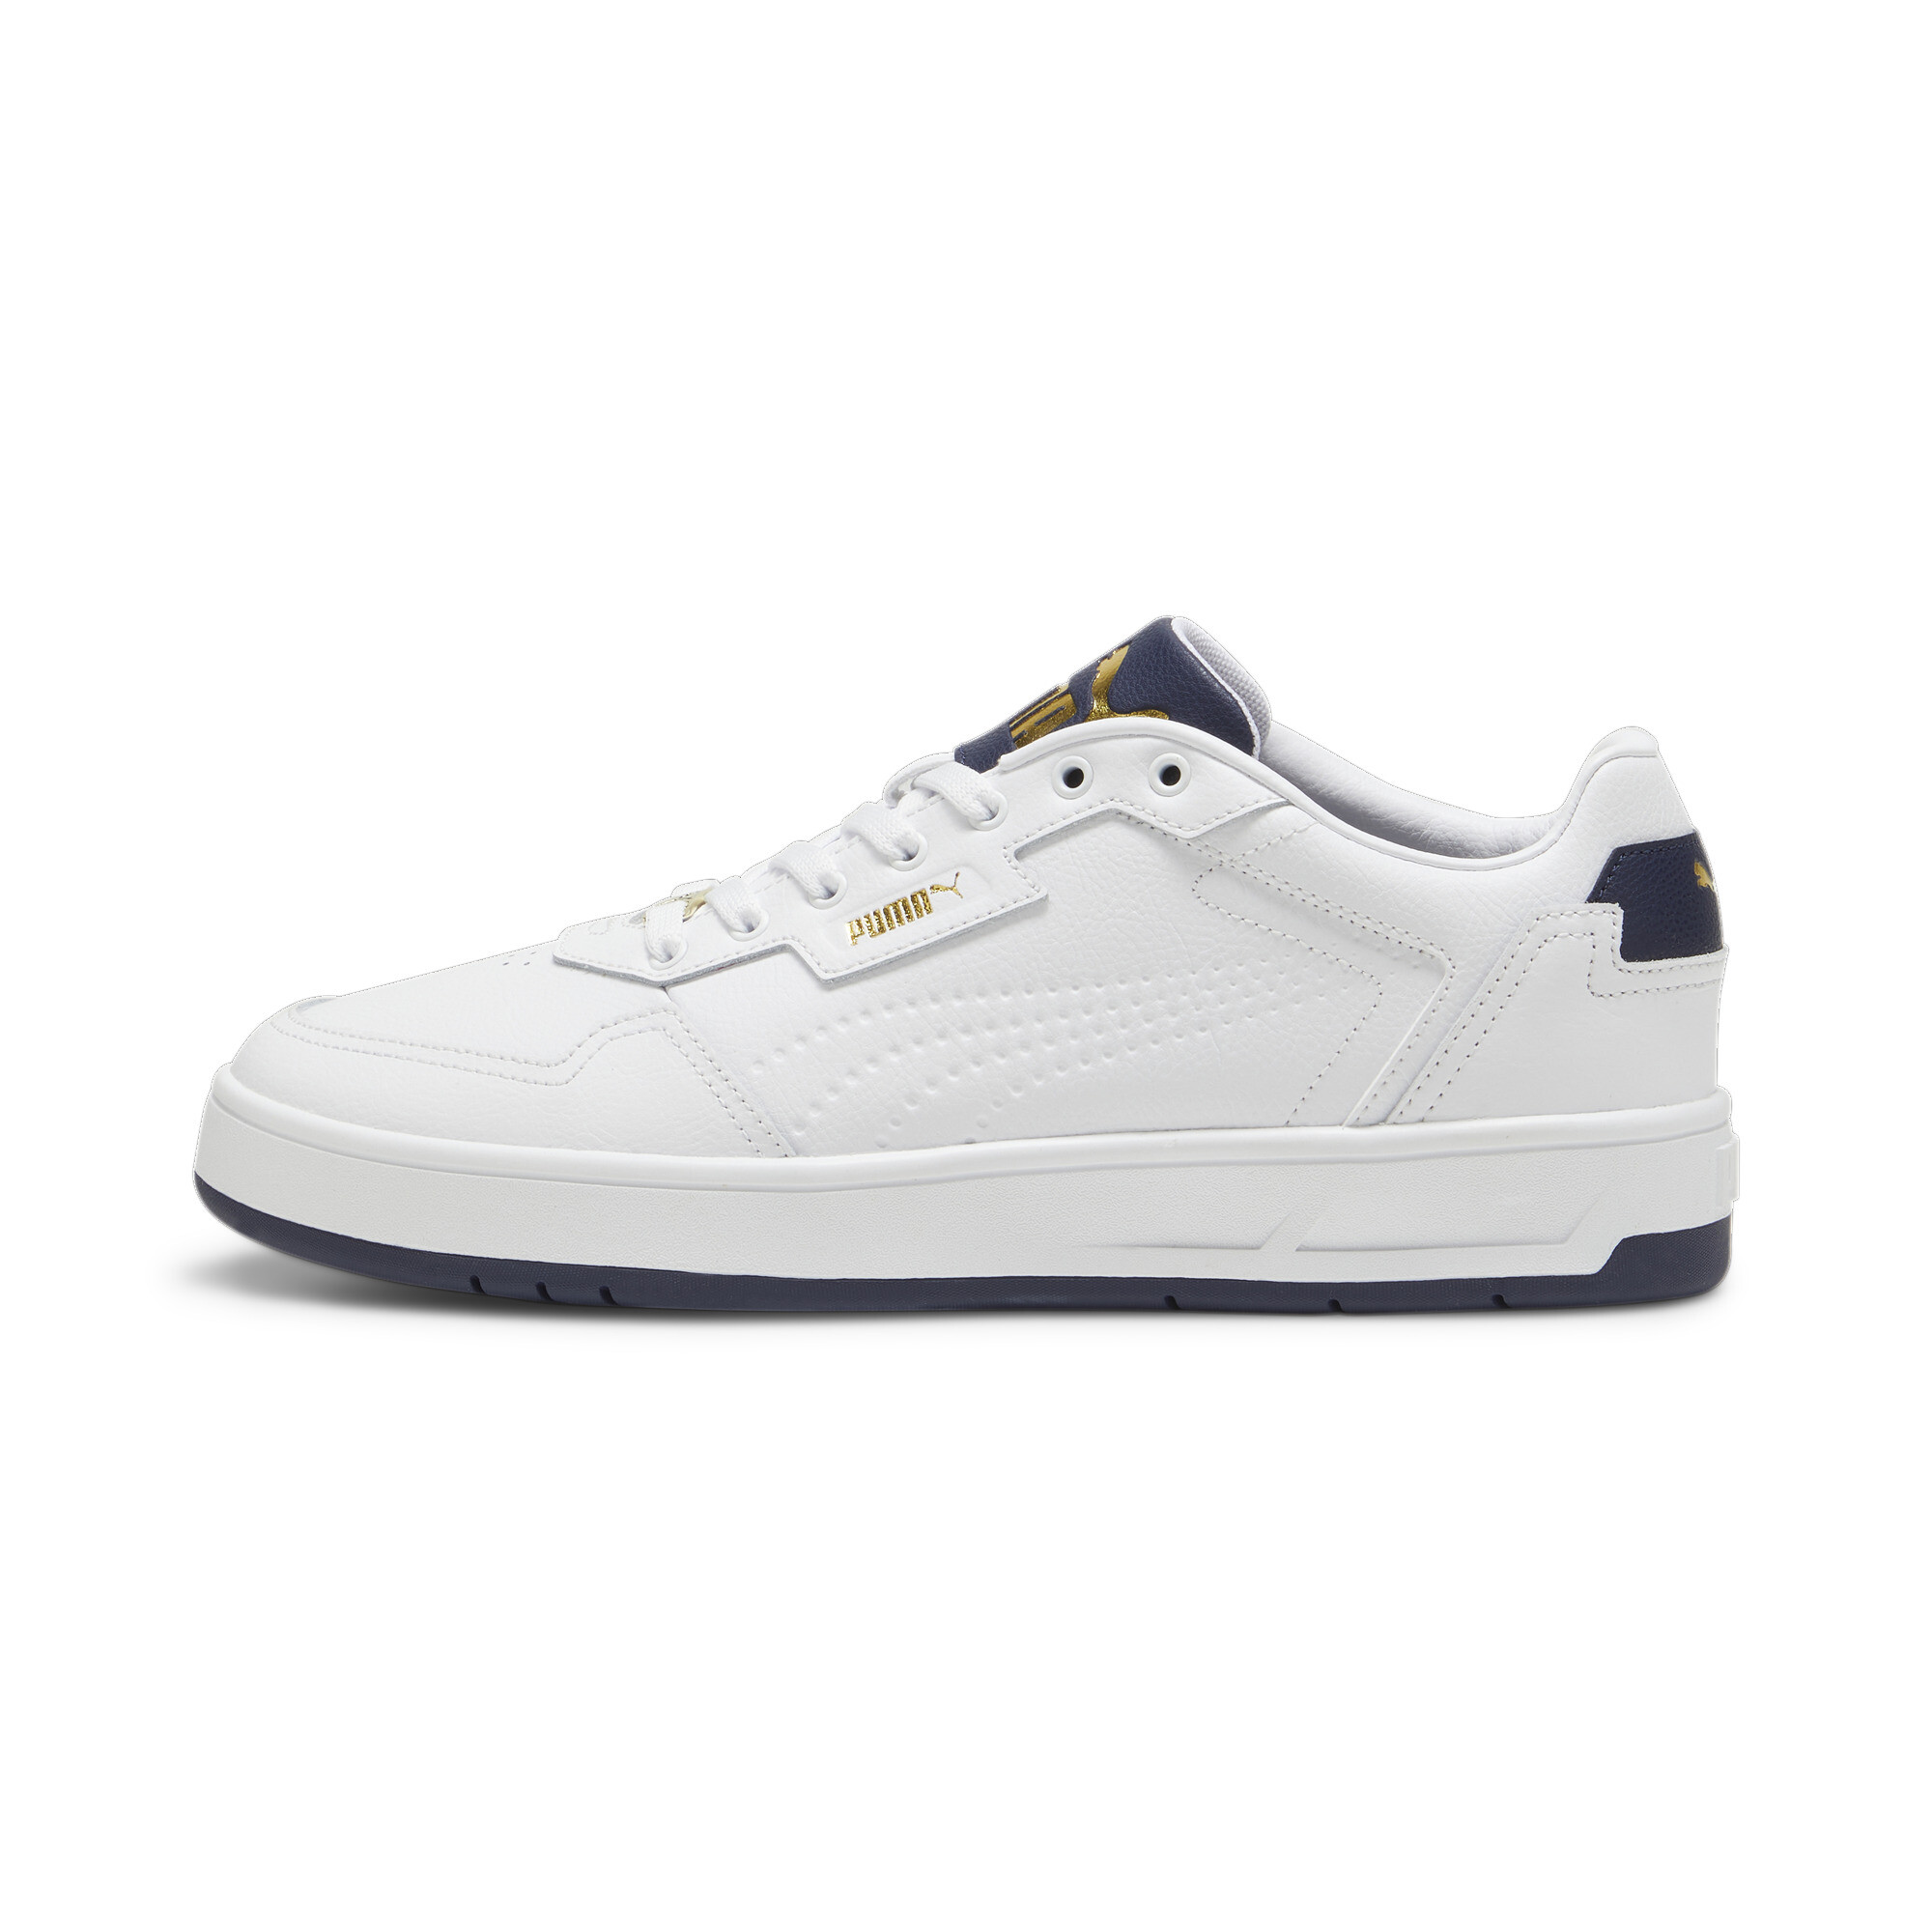 Puma Court Classic Lux Sneakers, White, Size 37.5, Shoes